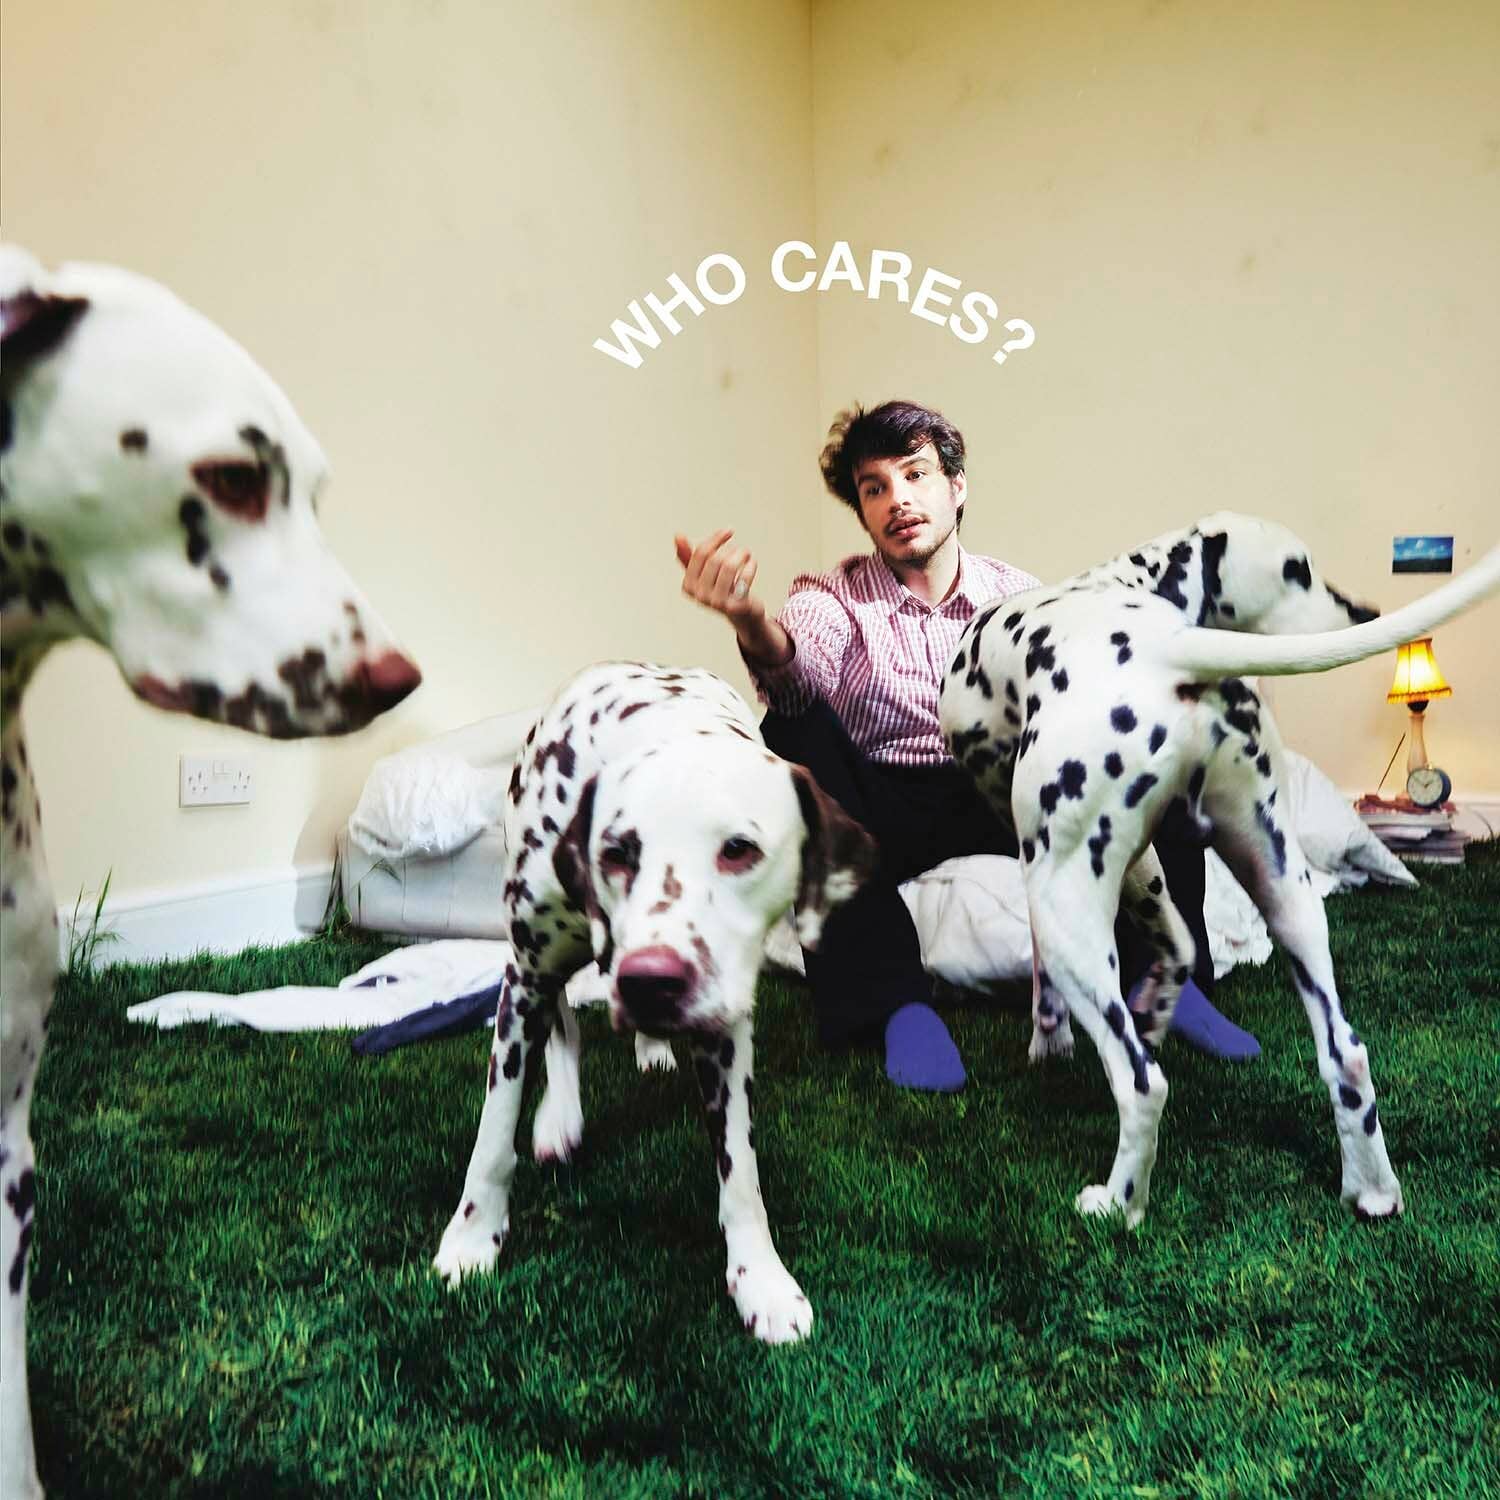 The cover art for Rex Orange County's album 'Who Cares?'